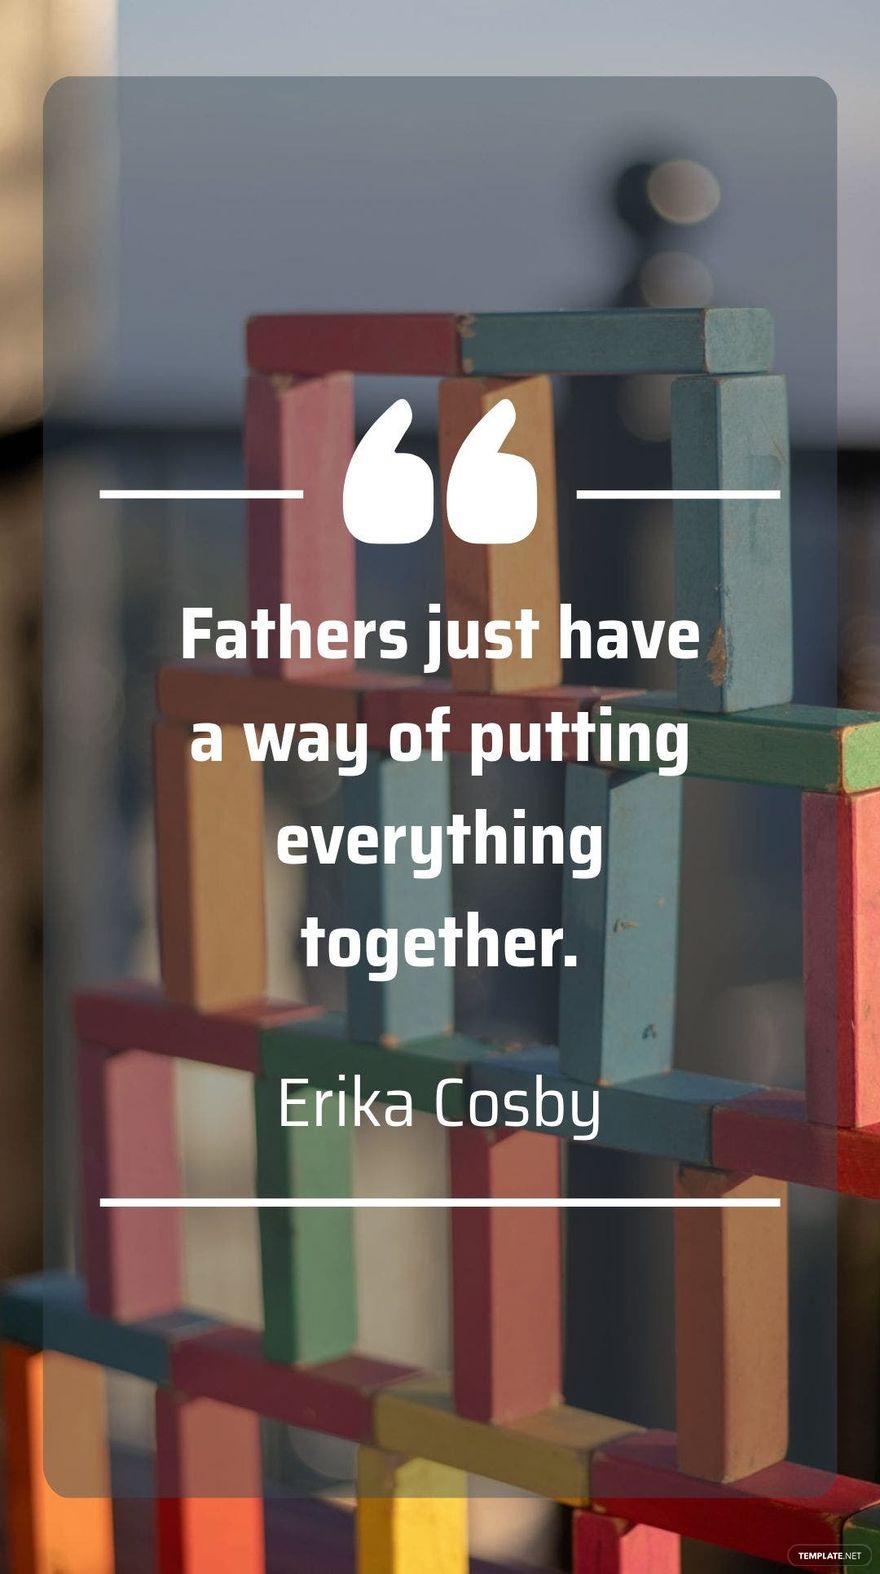 Free Erika Cosby - “Fathers just have a way of putting everything together.”  in JPG